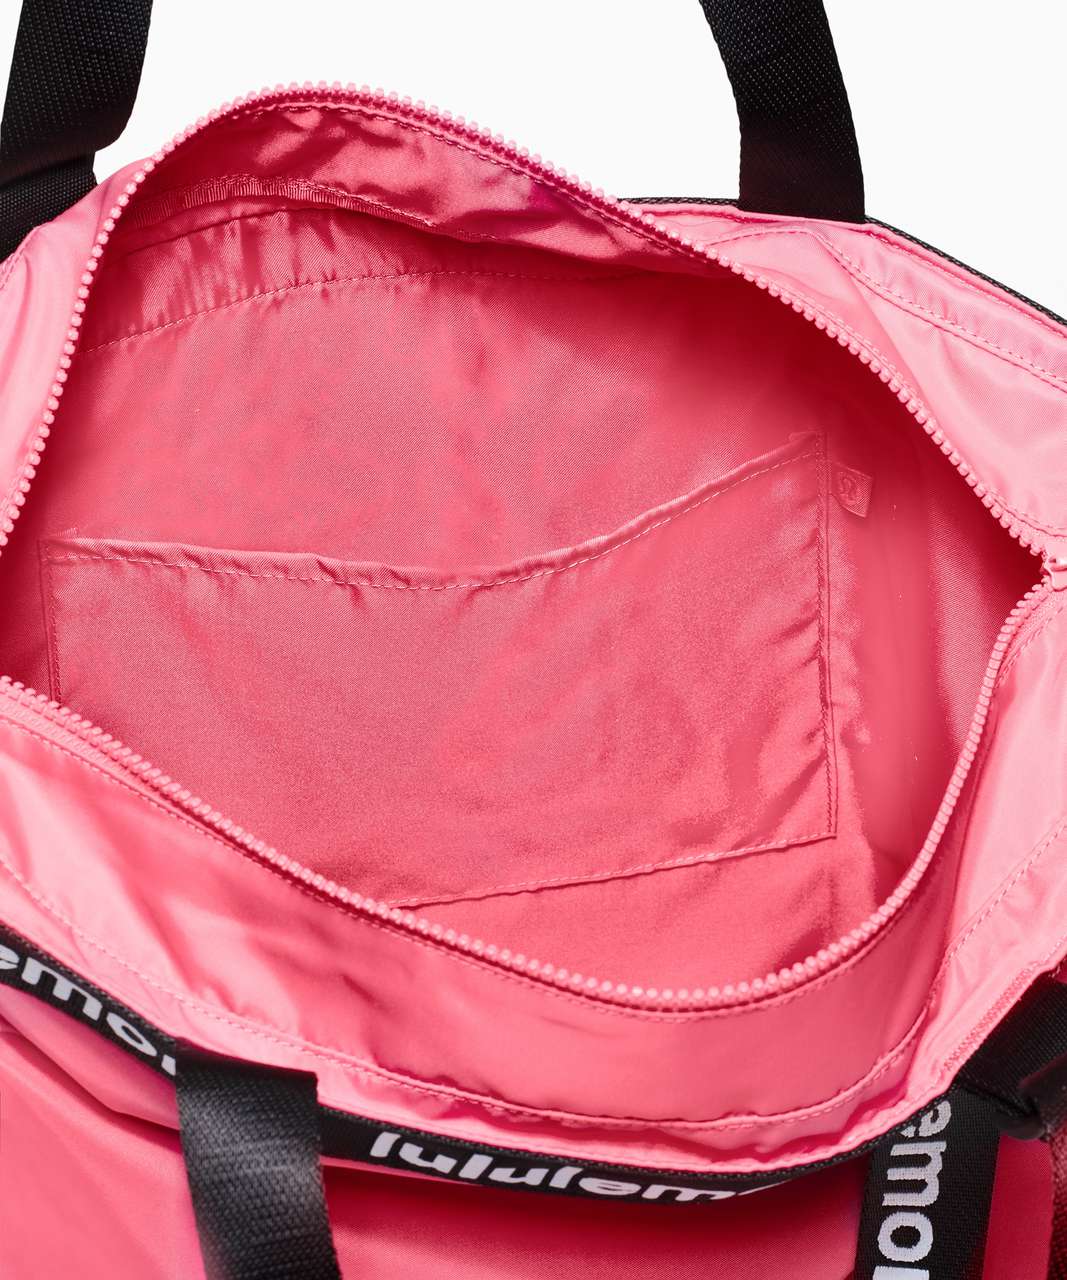 Lululemon The Rest is Written Tote - Guava Pink